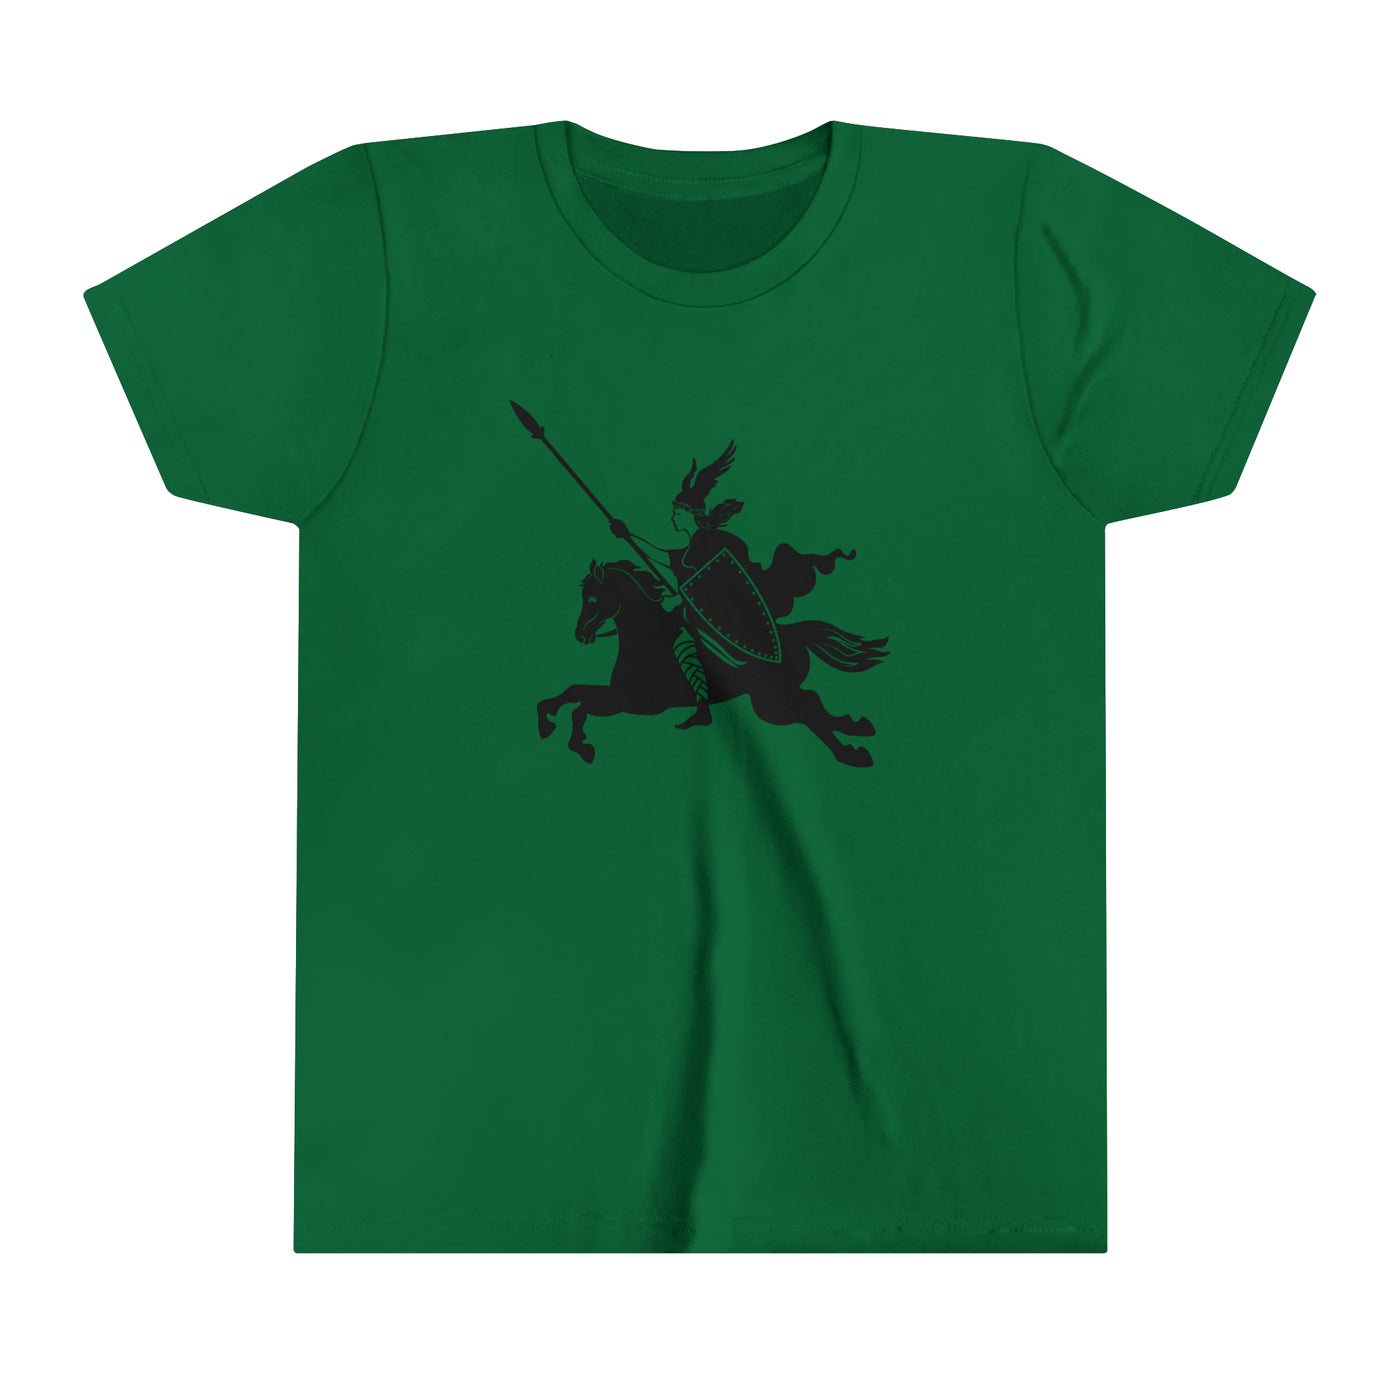 Valkyrie And Horse Kids T-Shirt